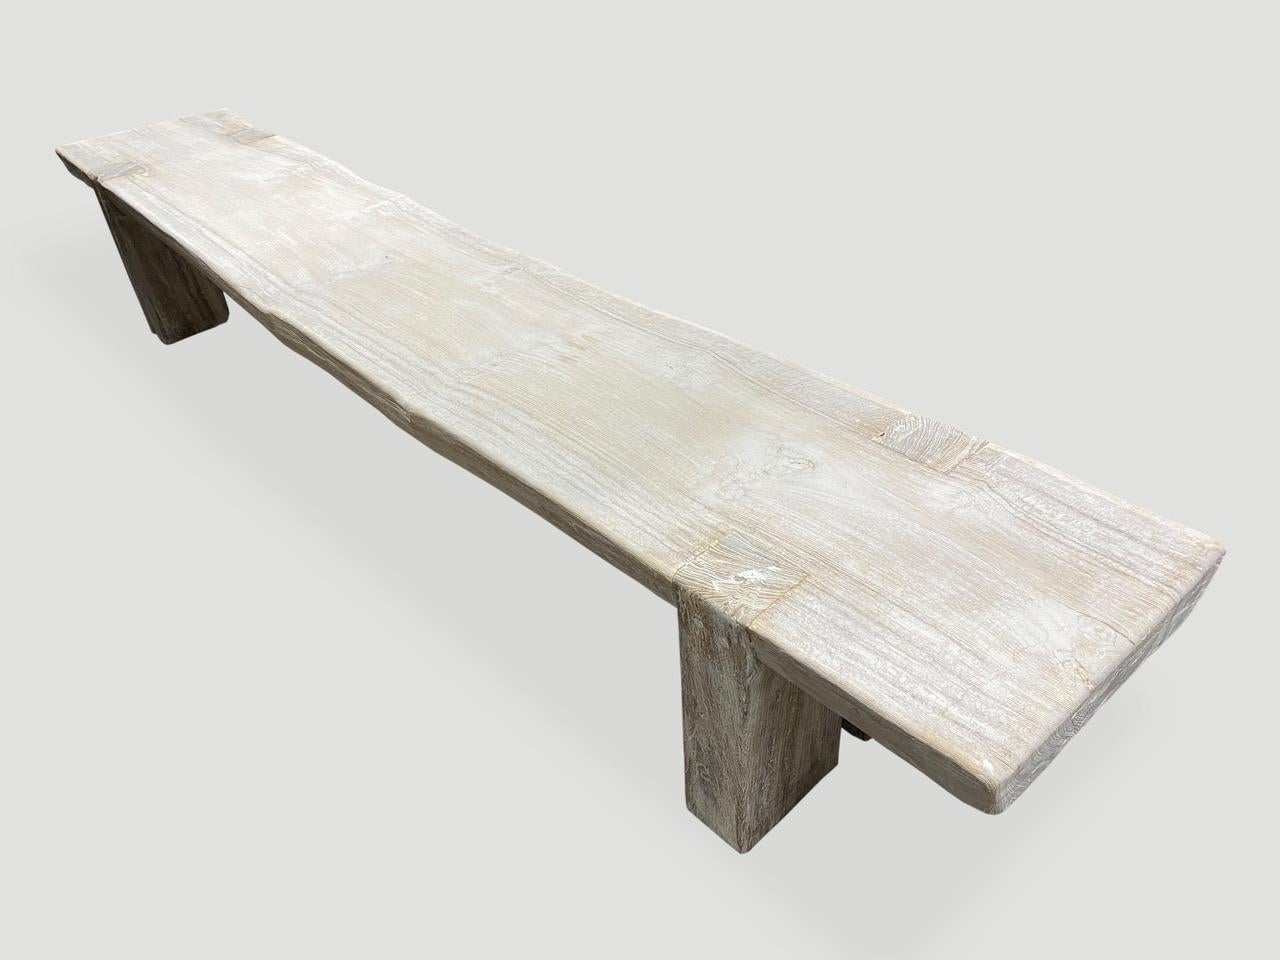 Impressive single 3.5” thick slab, reclaimed teak wood bench. We added the legs, bleached the wood and then finished with a light white wash exposing the beautiful grain of this aged teak wood bench.

The St. Barts Collection features an exciting